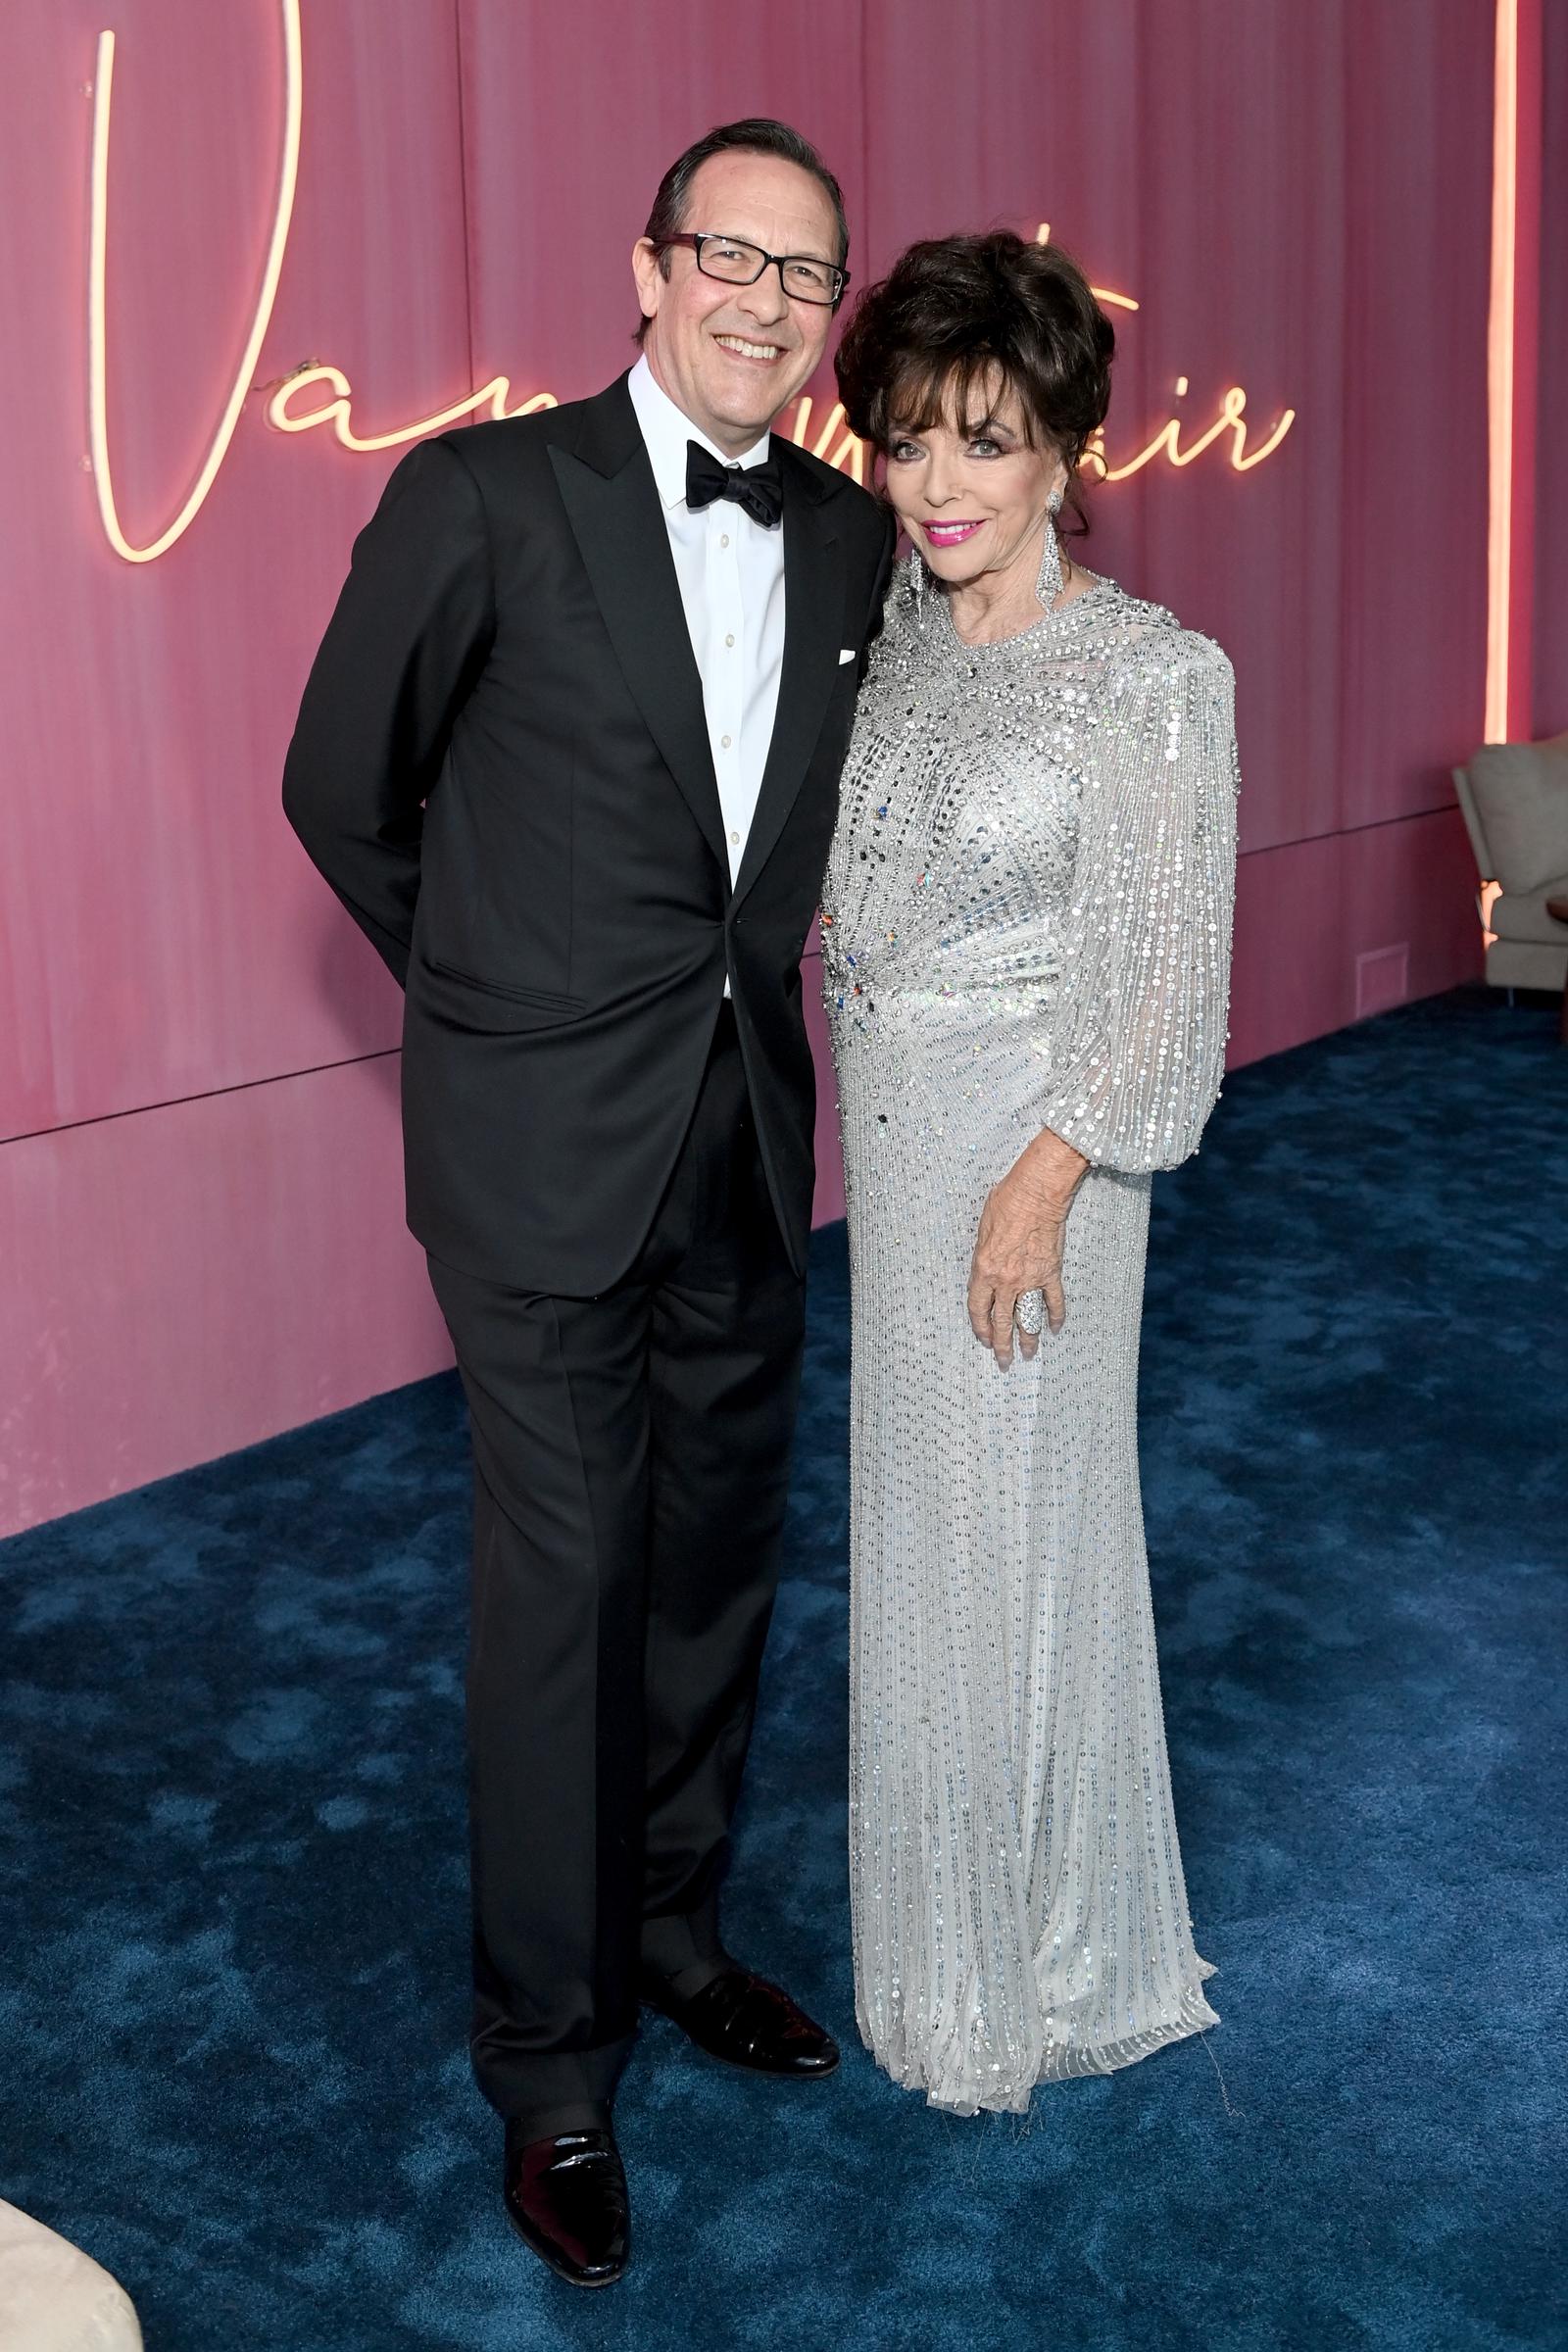 Percy Gibson and Joan Collins at the Vanity Fair Oscar Party hosted by Radhika Jones in Beverly Hills, on March 27, 2022. | Source: Getty Images